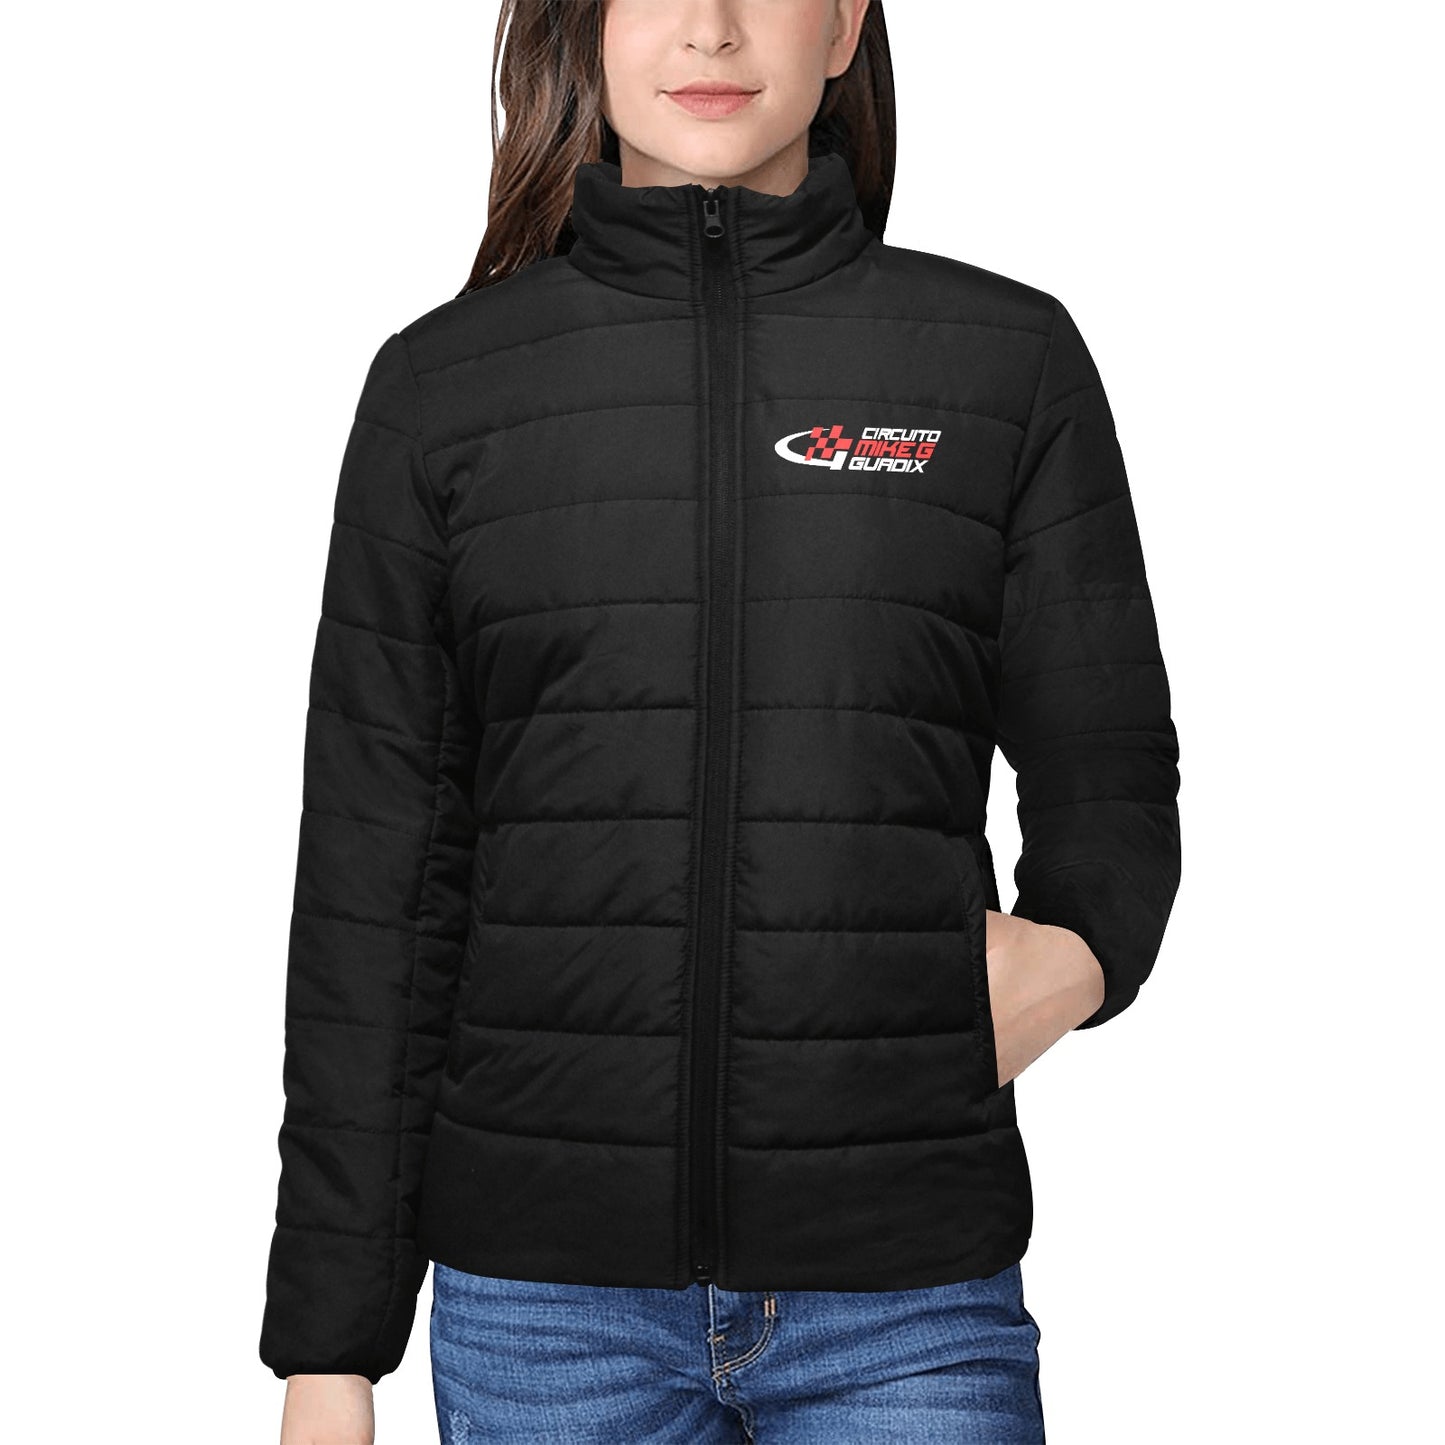 CIRCUITO MIKE G GUADIX Women's quilted puffer jacket - carbon